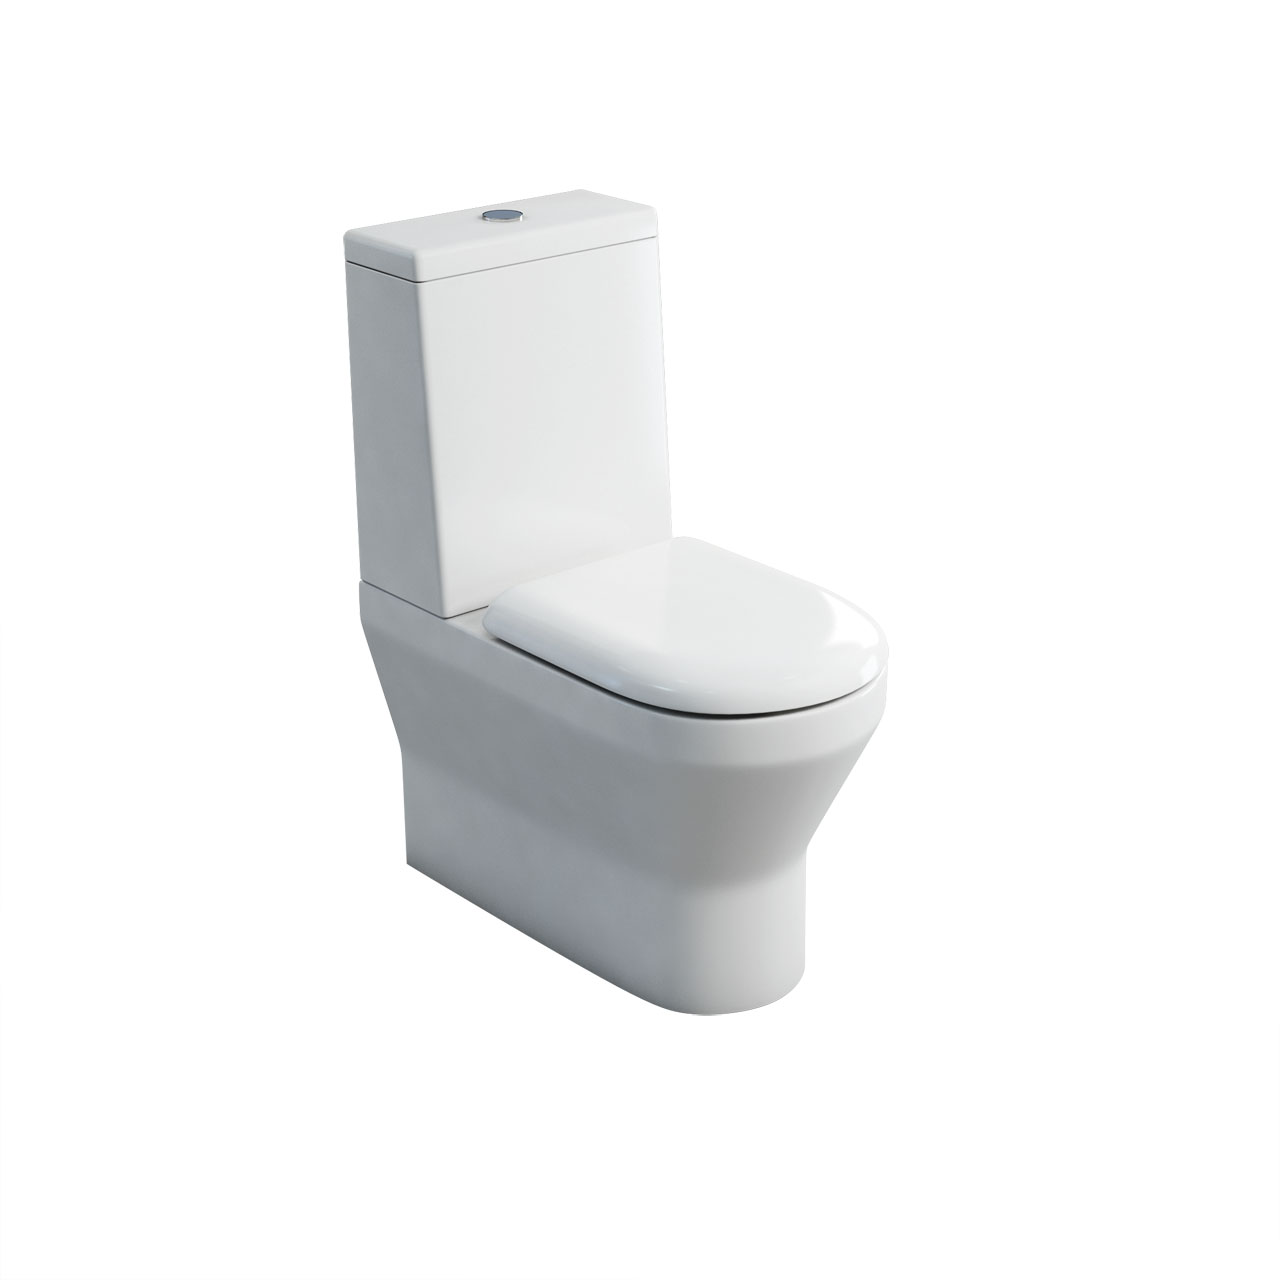 Curve S30 close-coupled WC (back to wall) with standard lid cistern & soft - close seat